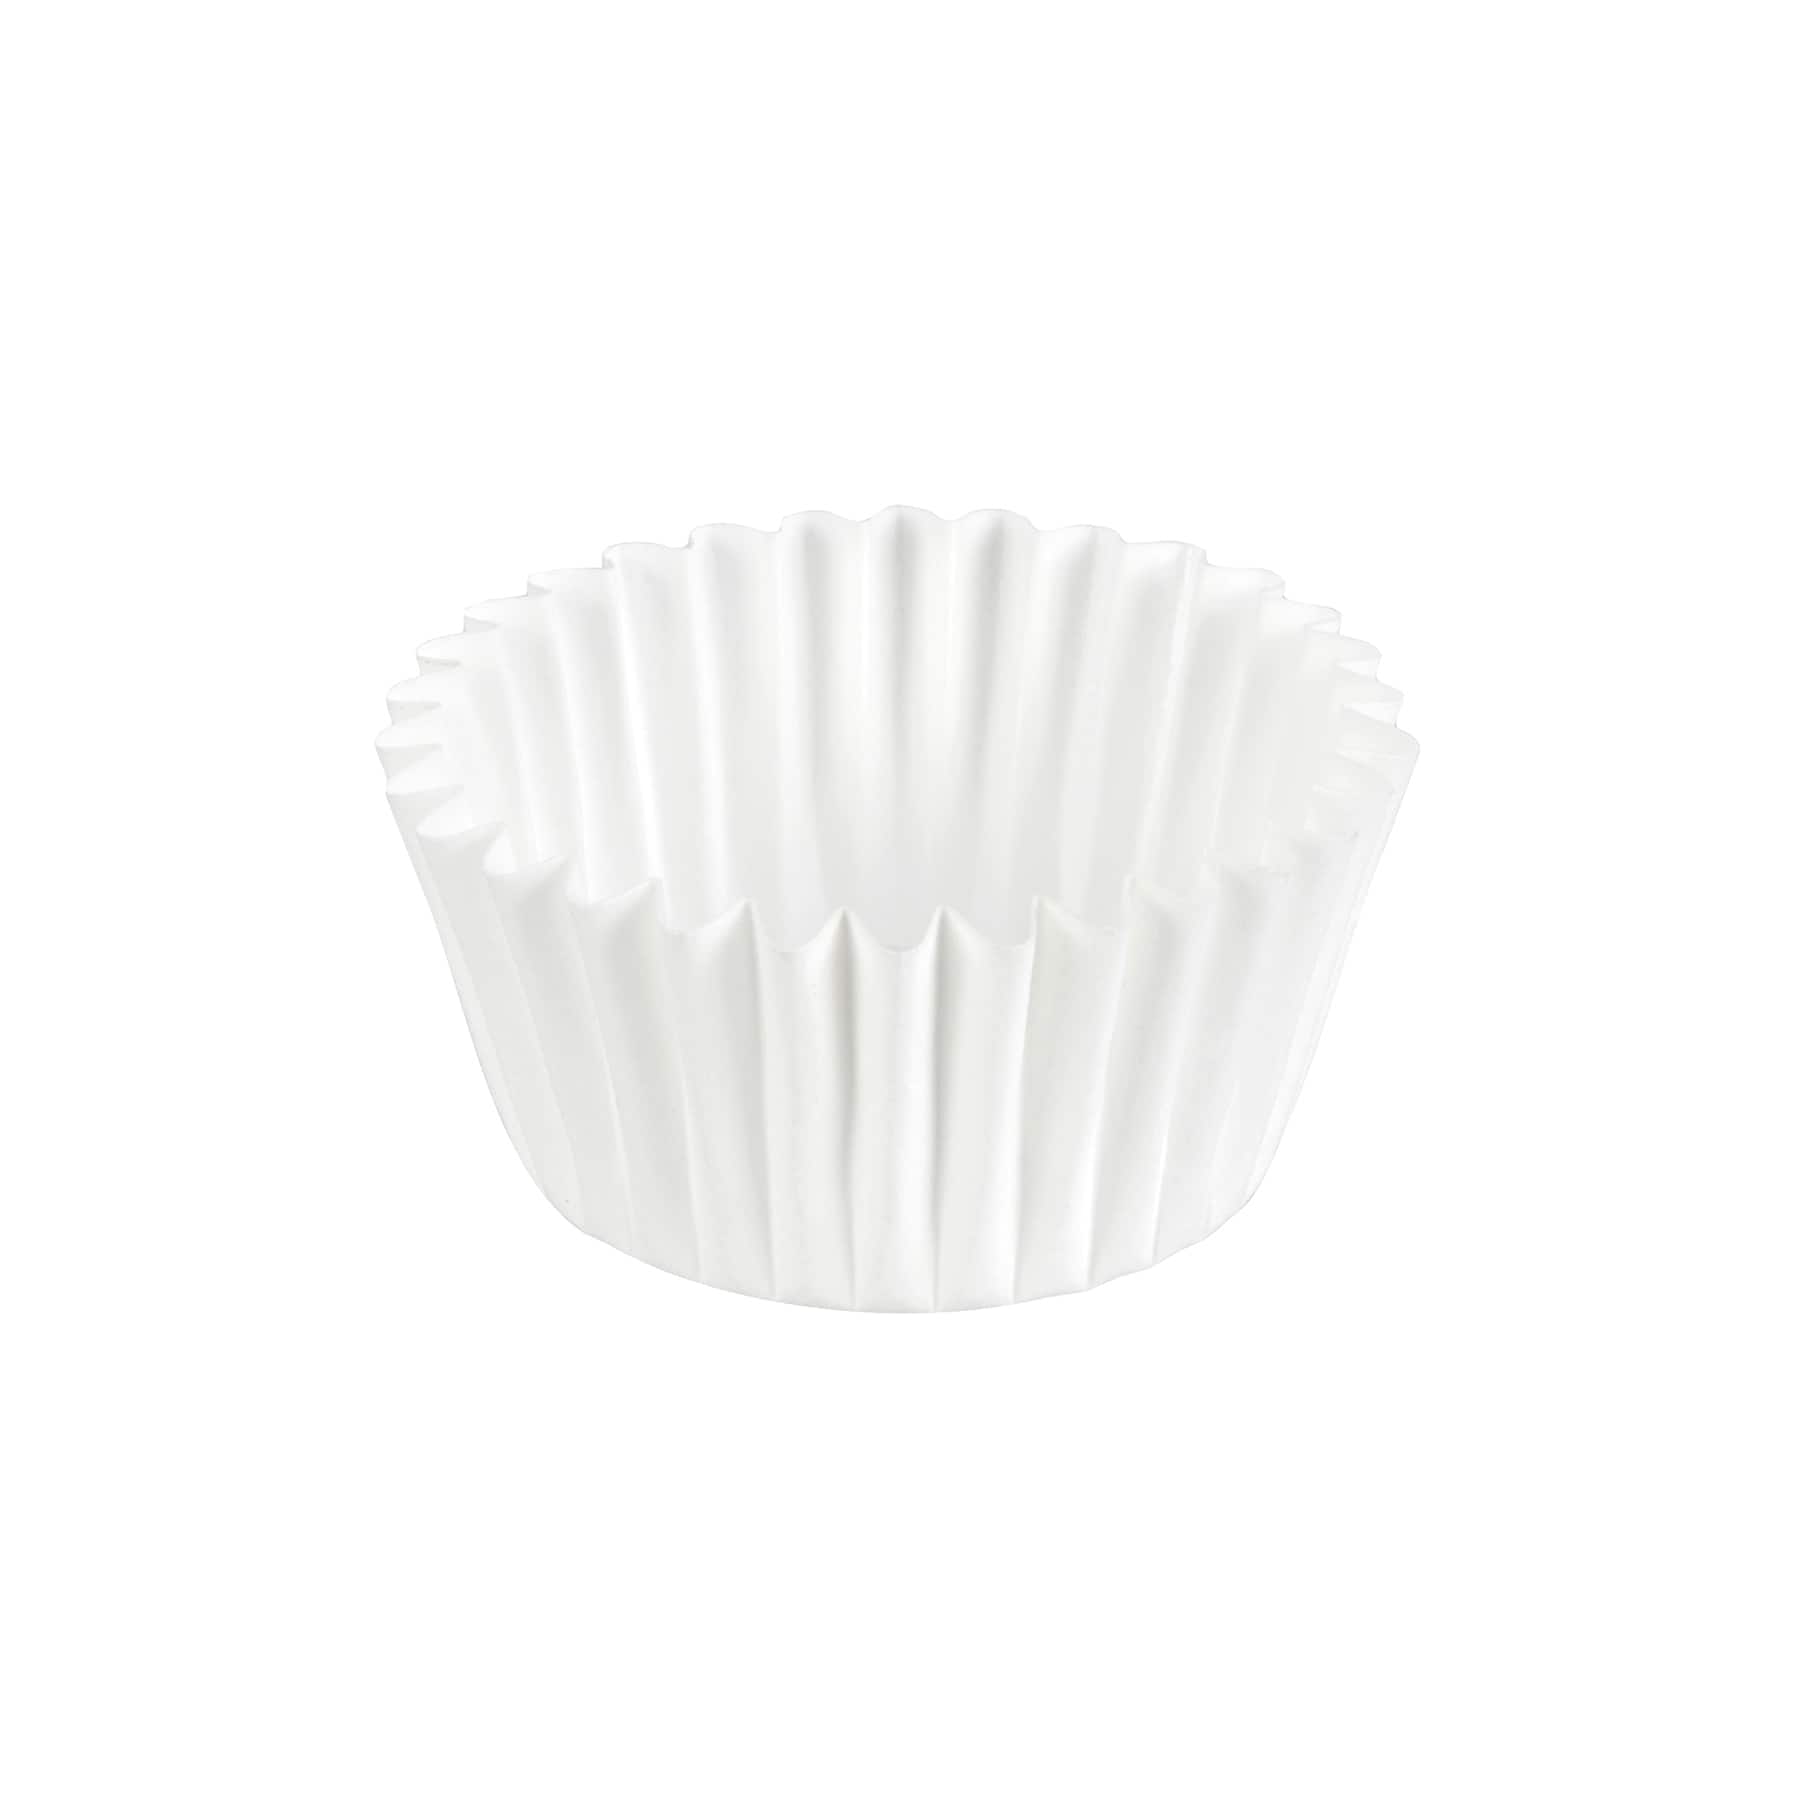 White Baking Cups by Celebrate It®